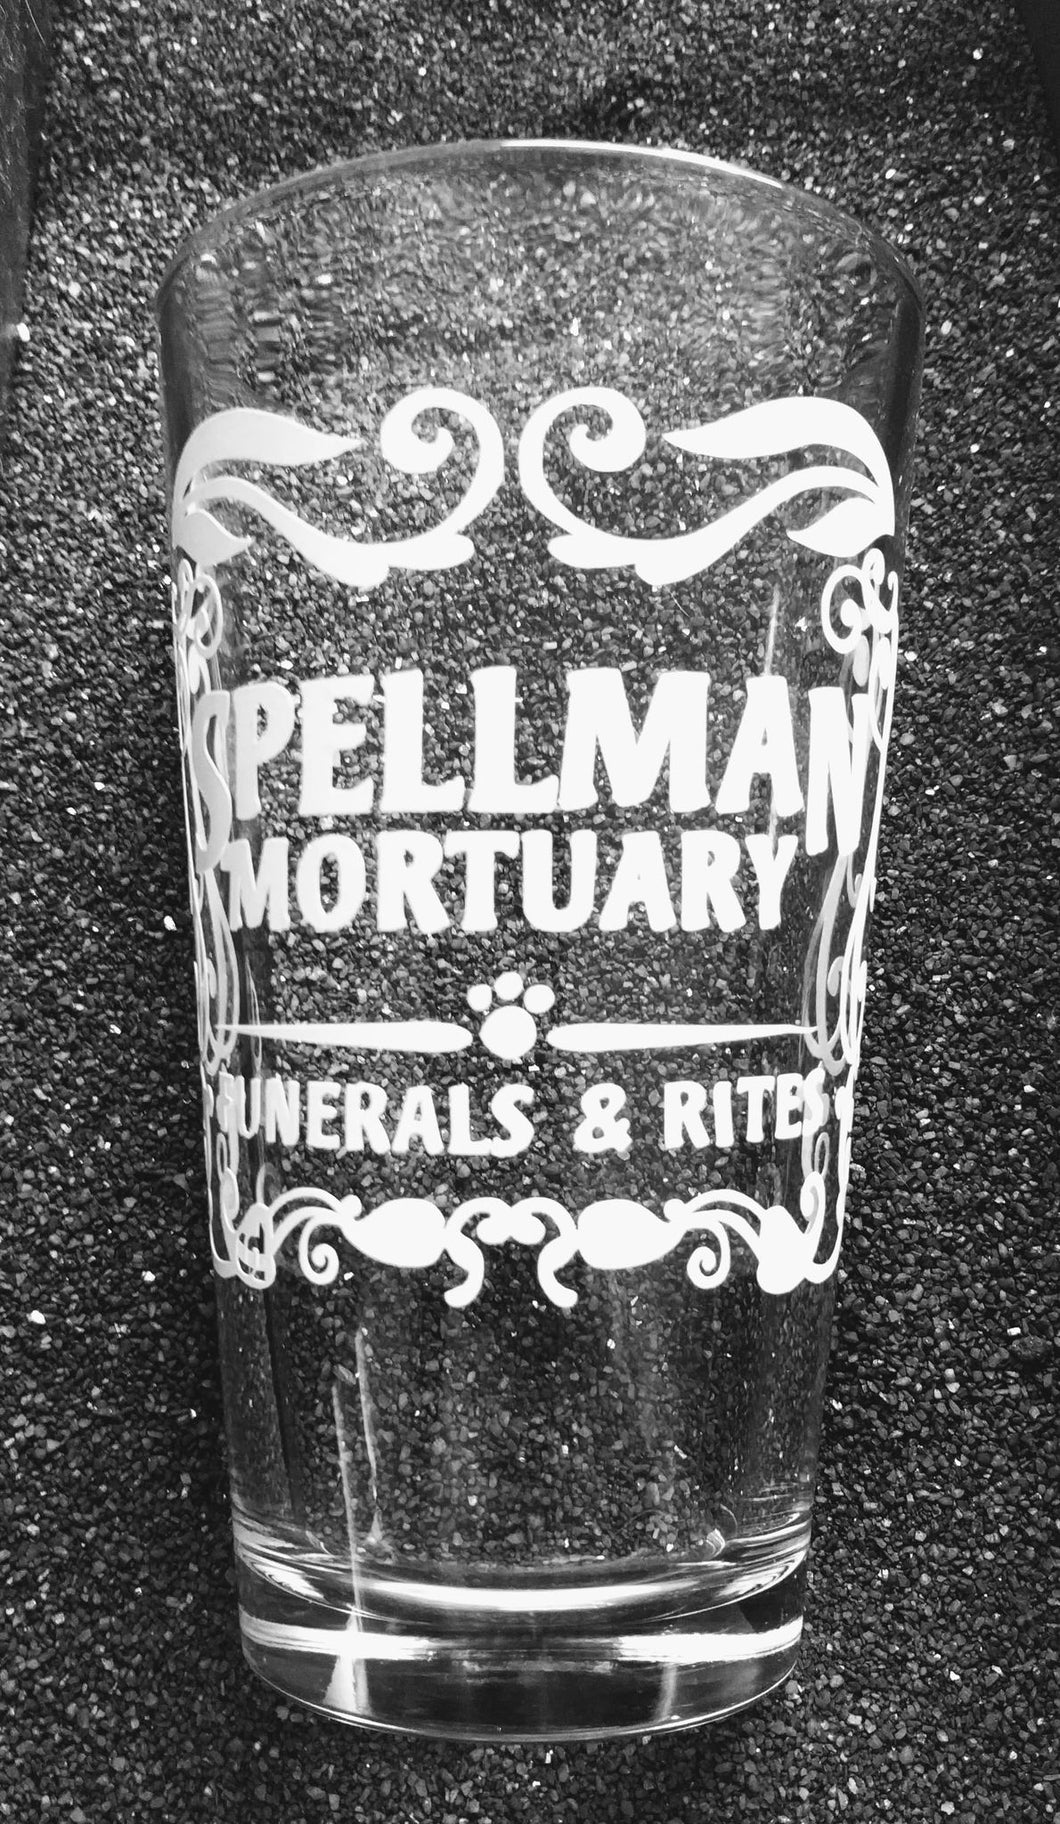 Sabrina inspired Spellman's Mortuary etched pint glass tumbler cup